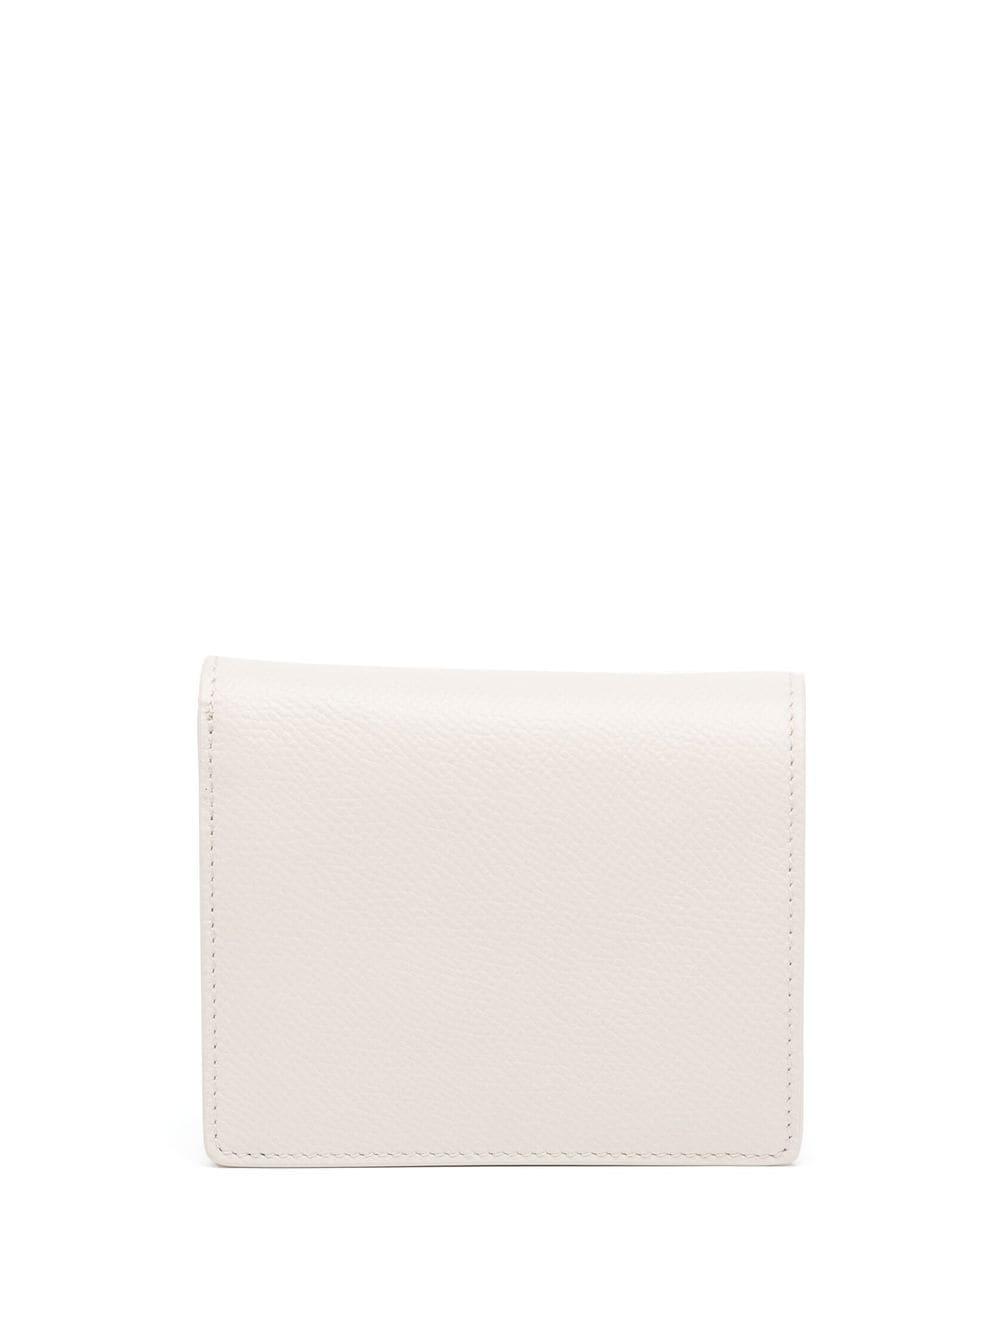 Maison Margiela Wallet With Stitching Detail in White | Lyst